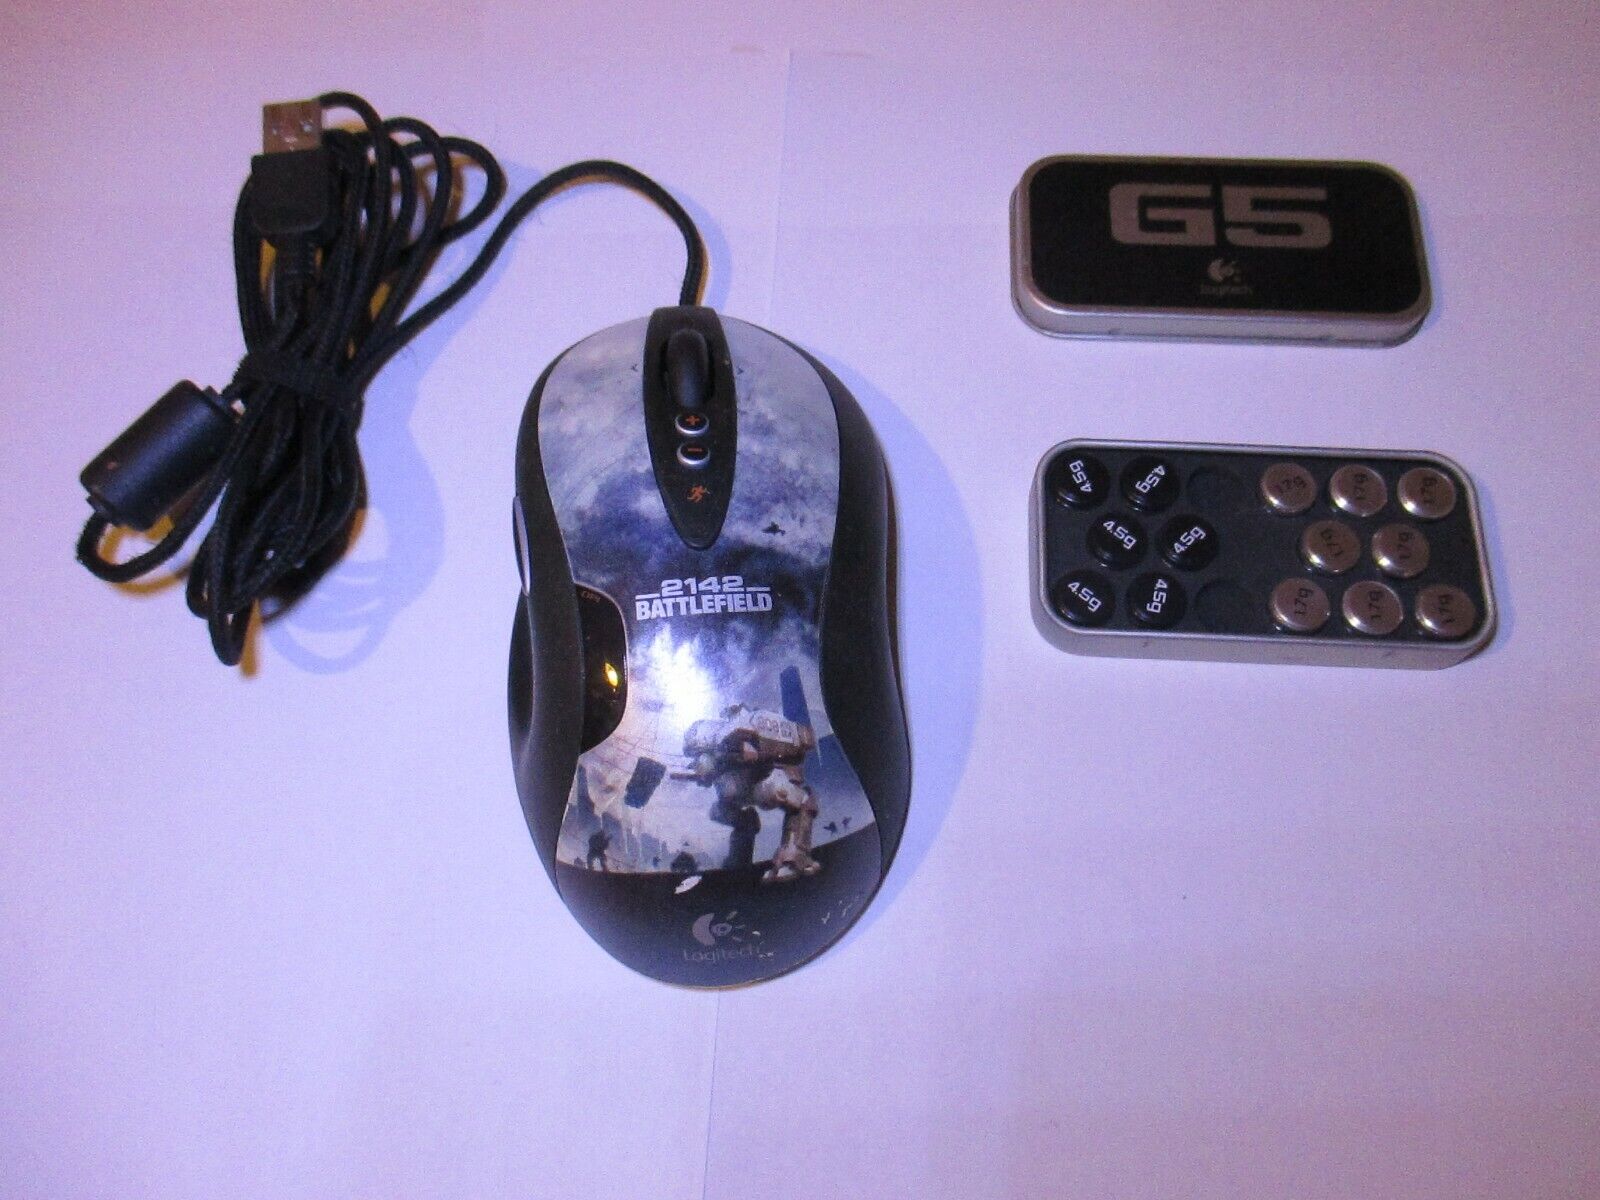 Logitech G5 Laser Gaming Mouse Battlefield 2142 Special Edition Works Great Rare